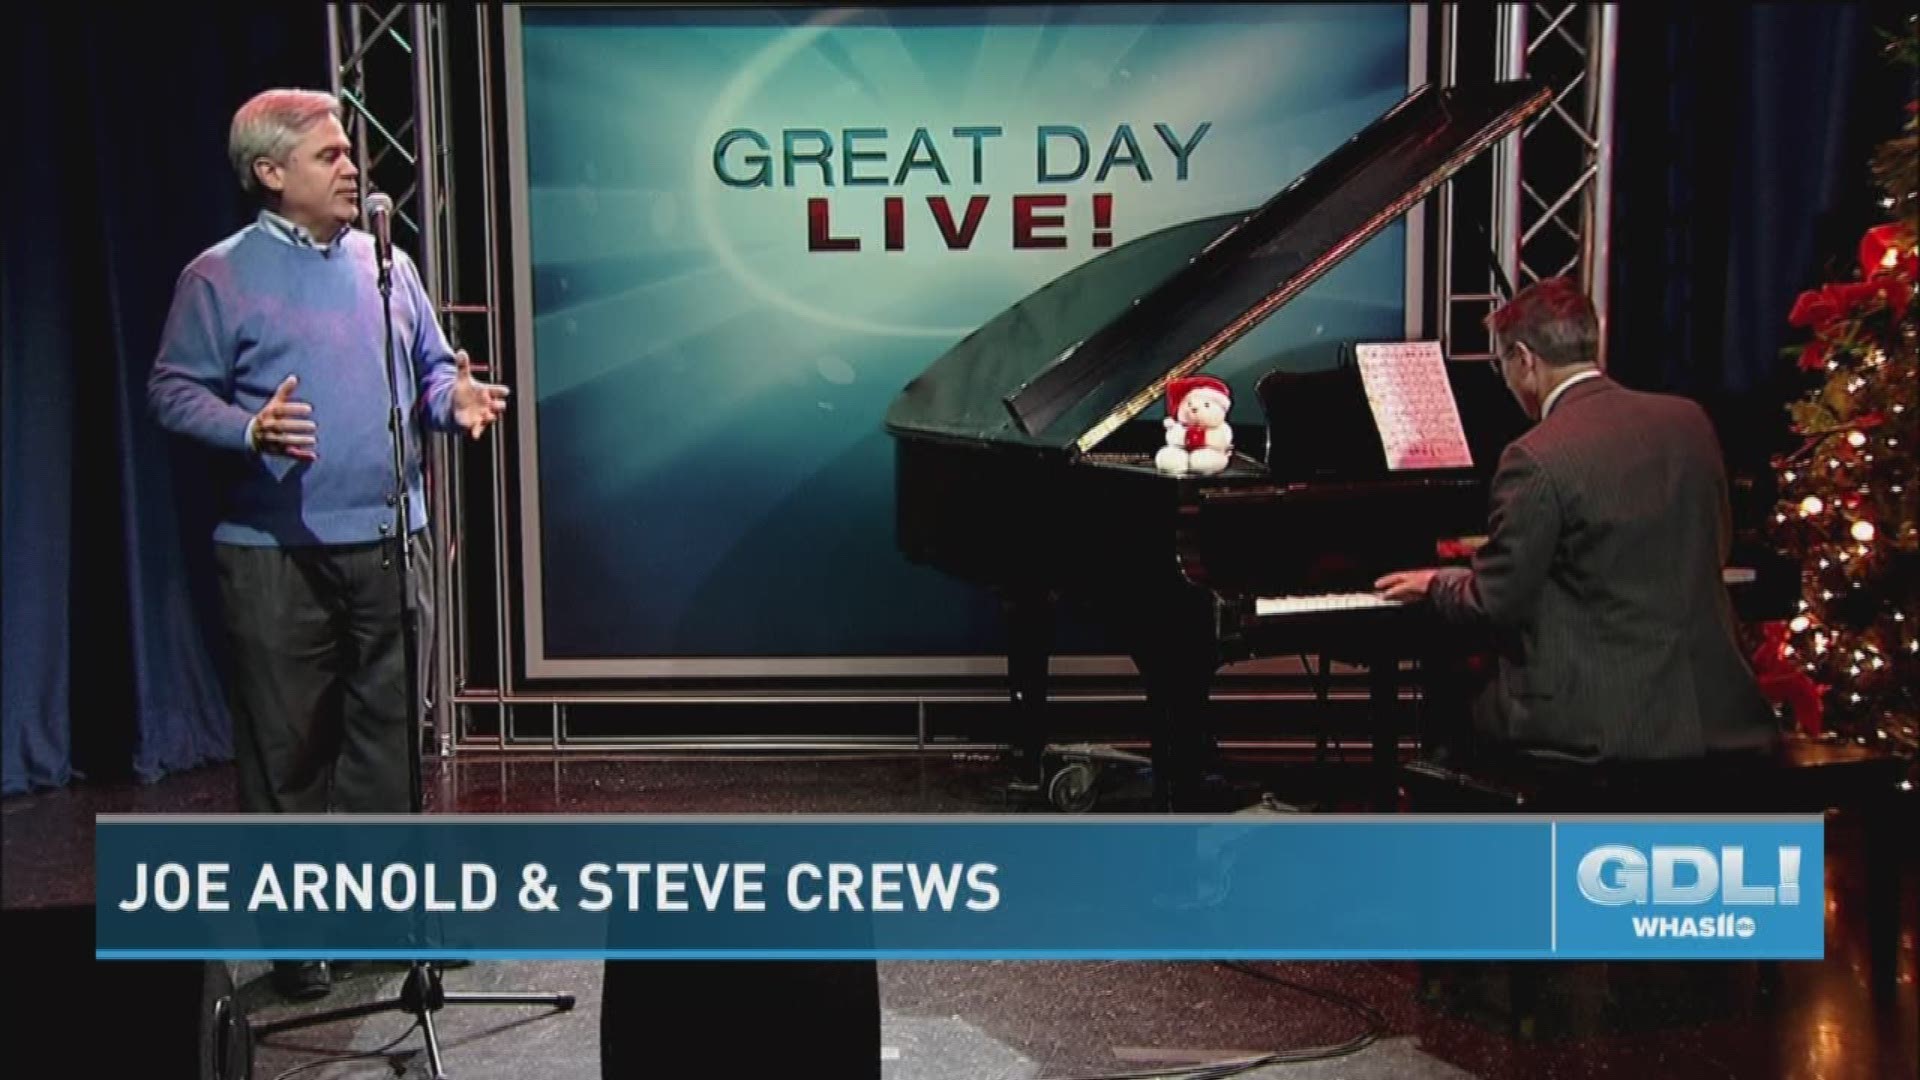 Every year during the holidays, Great Day Live invites one of our favorite duos to the show to spread a little Christmas cheer throughout the studio. Former WHAS11 employee and songbird Joe Arnold stopped by with Steve Crews to play some holiday classics.